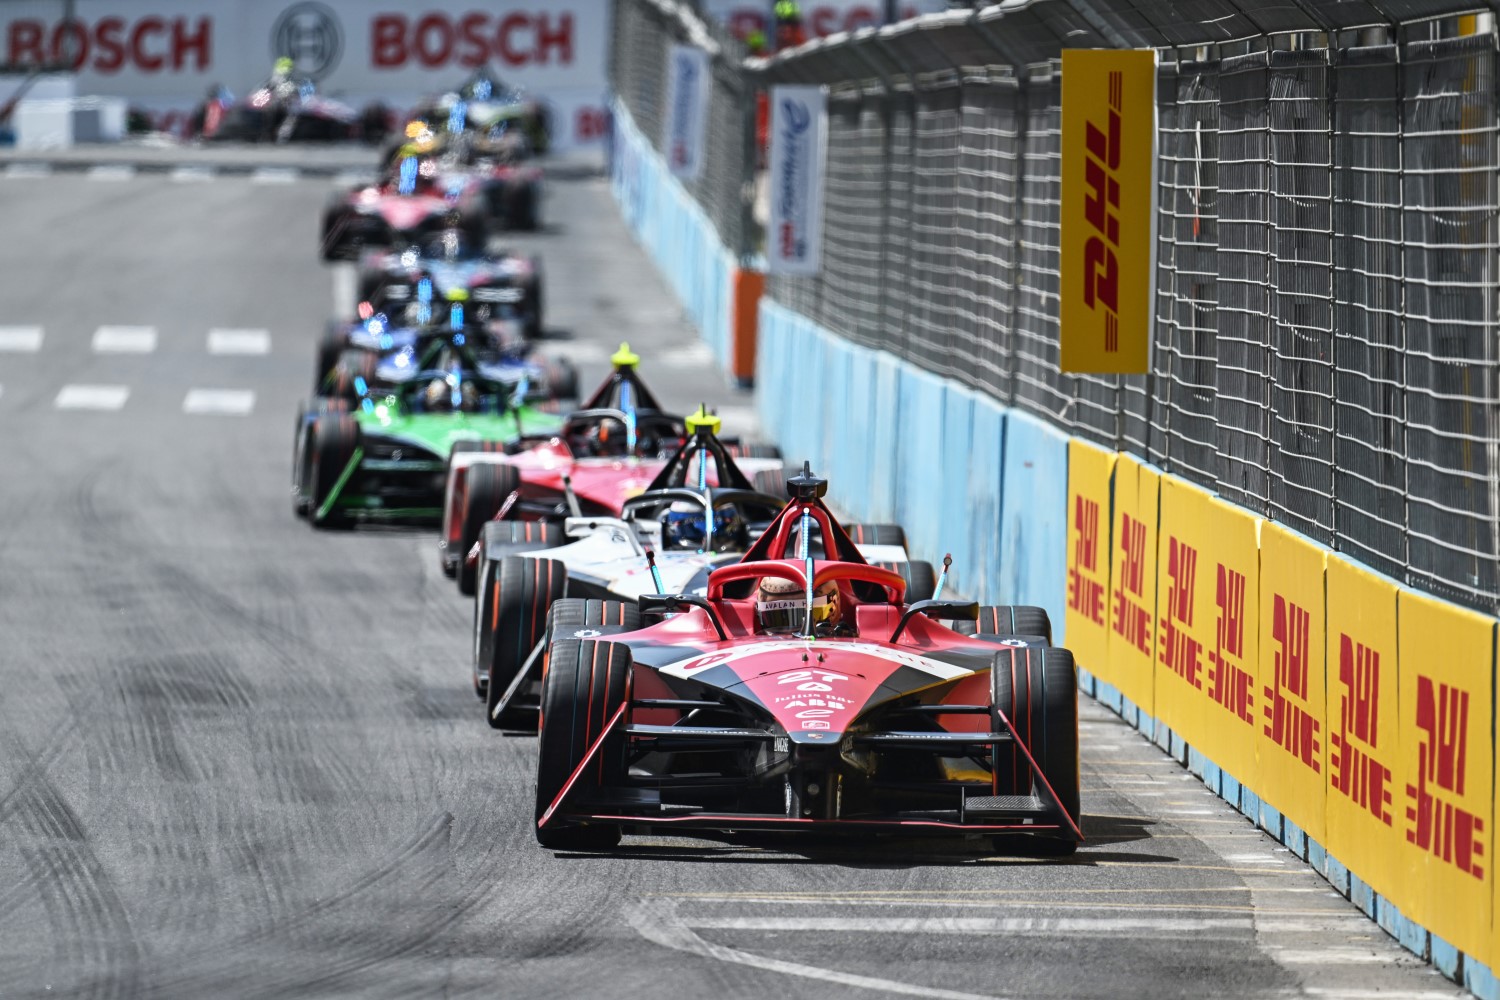 Jake Dennis, Avalanche Andretti Formula E, Porsche 99 X Electric Gen3, leads Sam Bird, Jaguar TCS Racing, Jaguar I-TYPE 6 during the Rome ePrix II at Circuito Cittadino dell'EUR on Sunday July 16, 2023 in Rome, Italy. (Photo by Sam Bagnall / LAT Images)